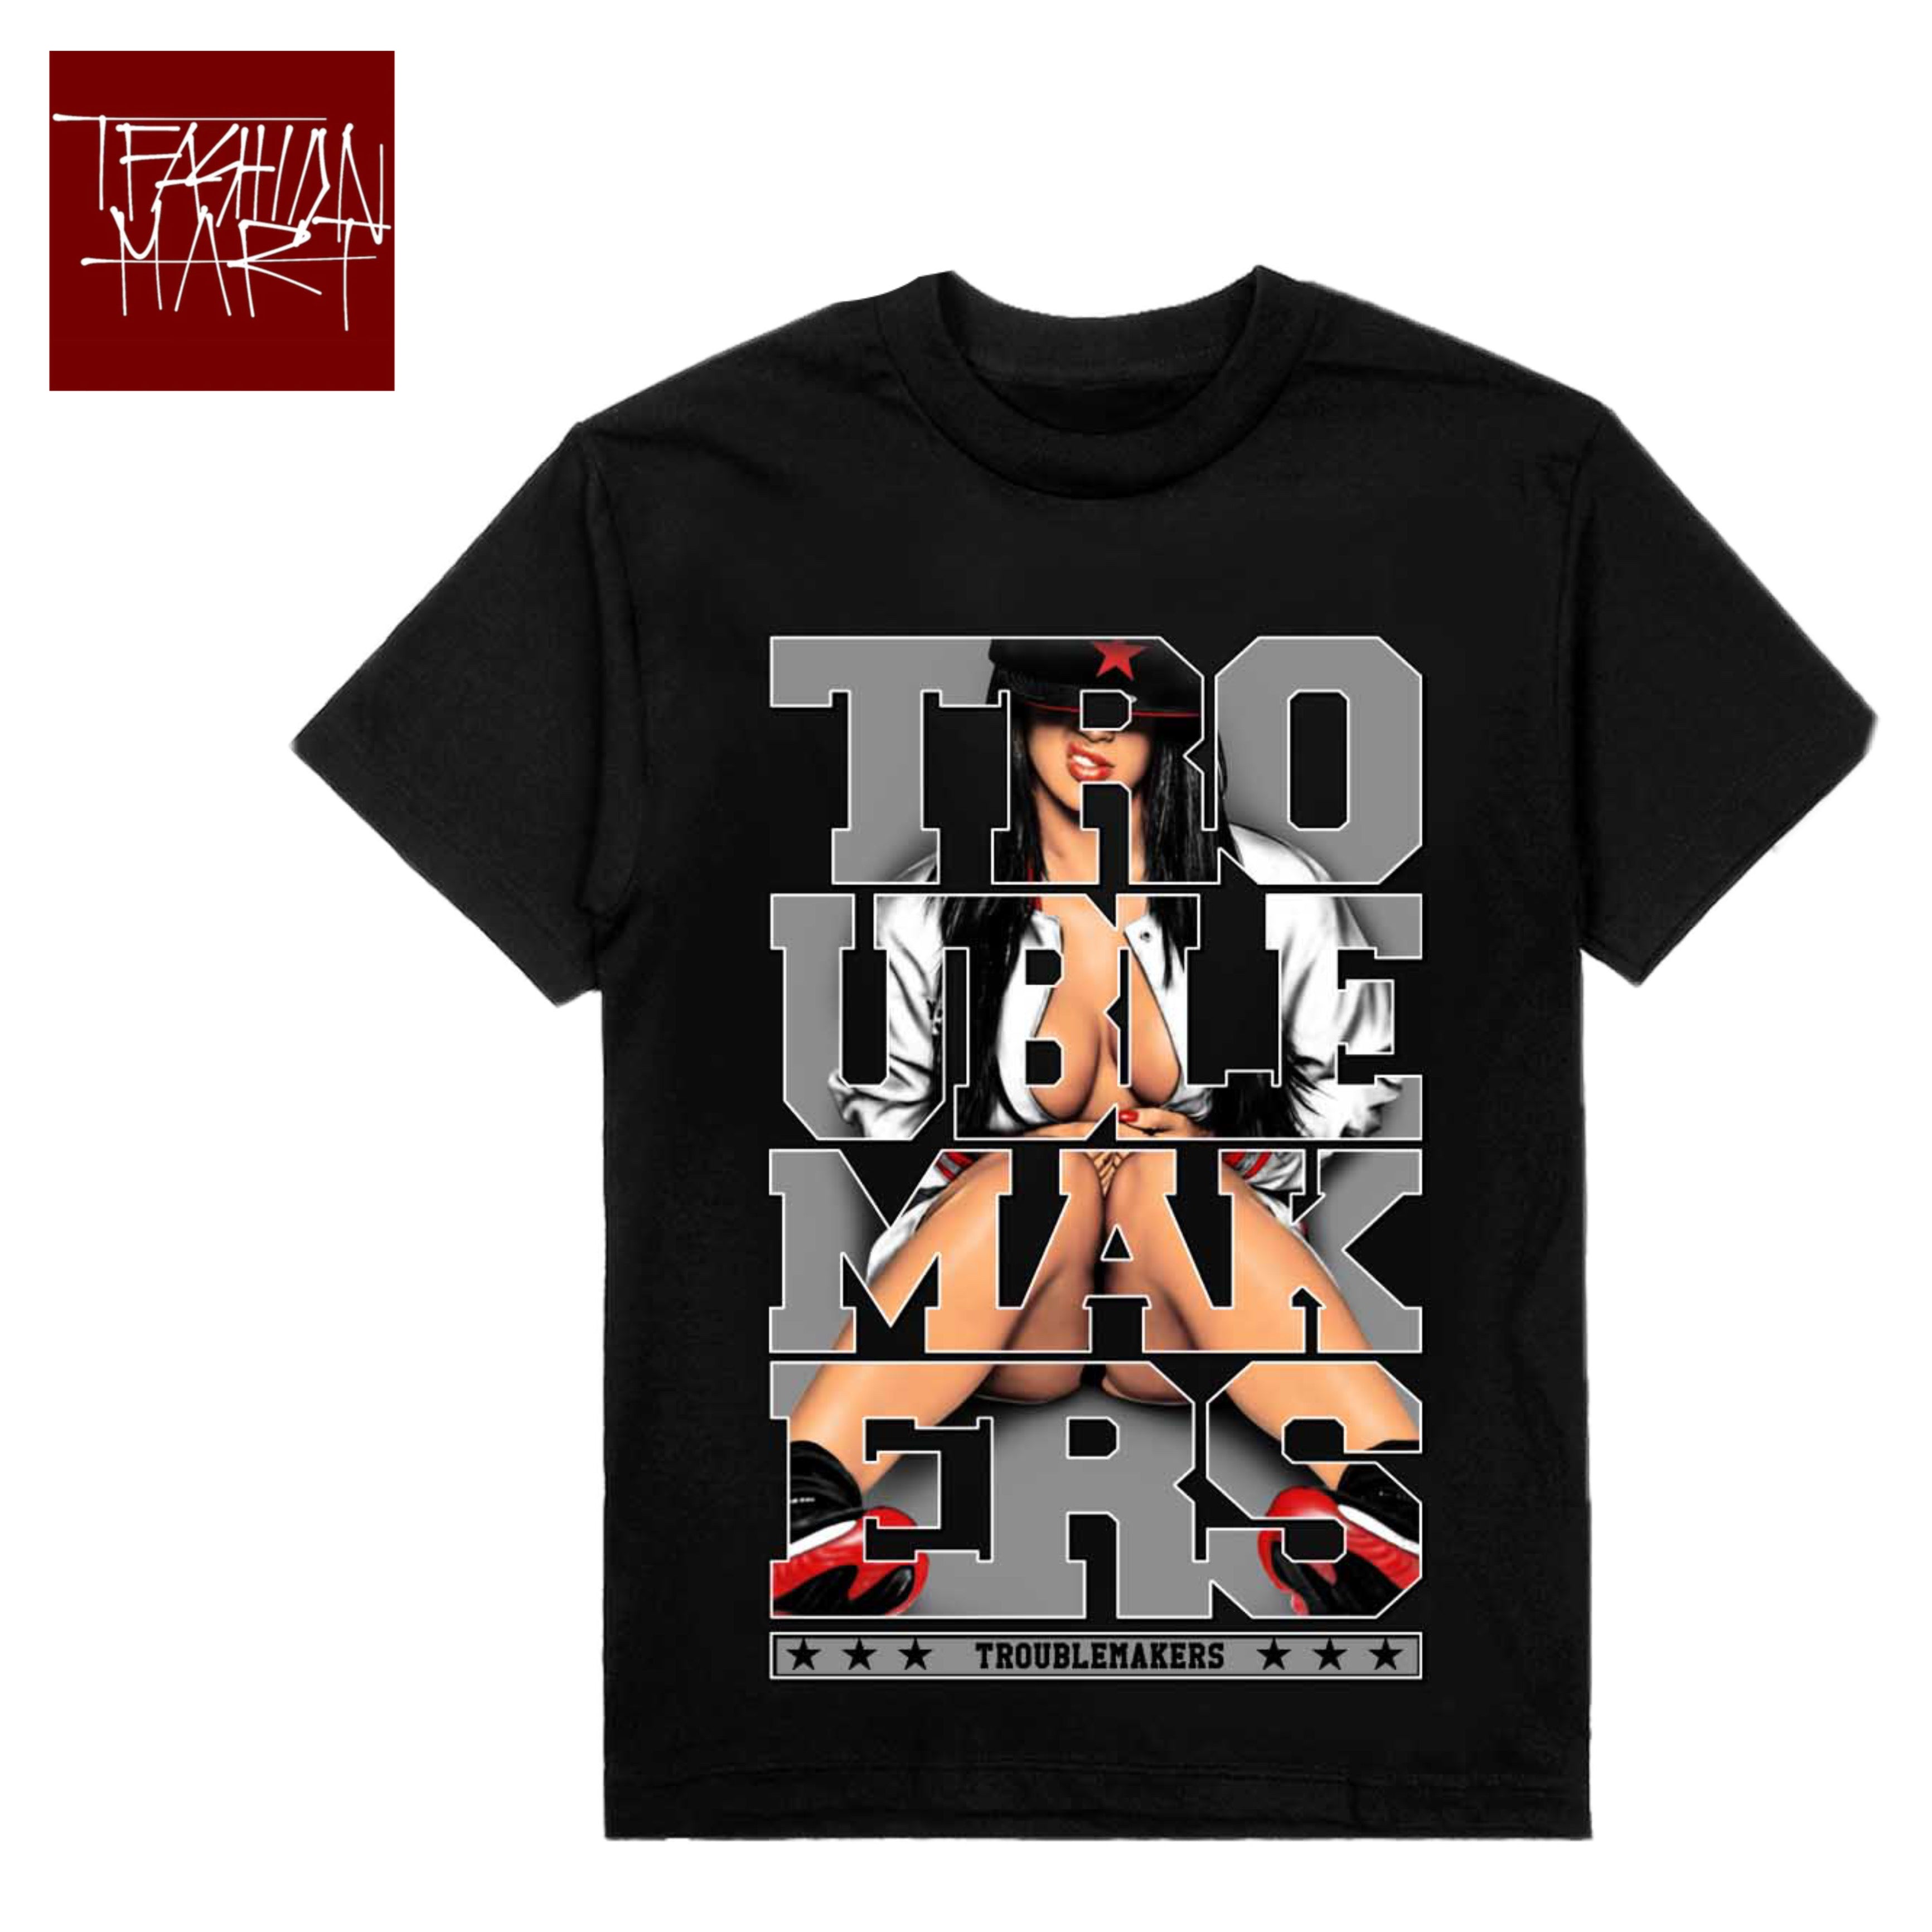 TFashion Graphic Tee - Trouble Makers